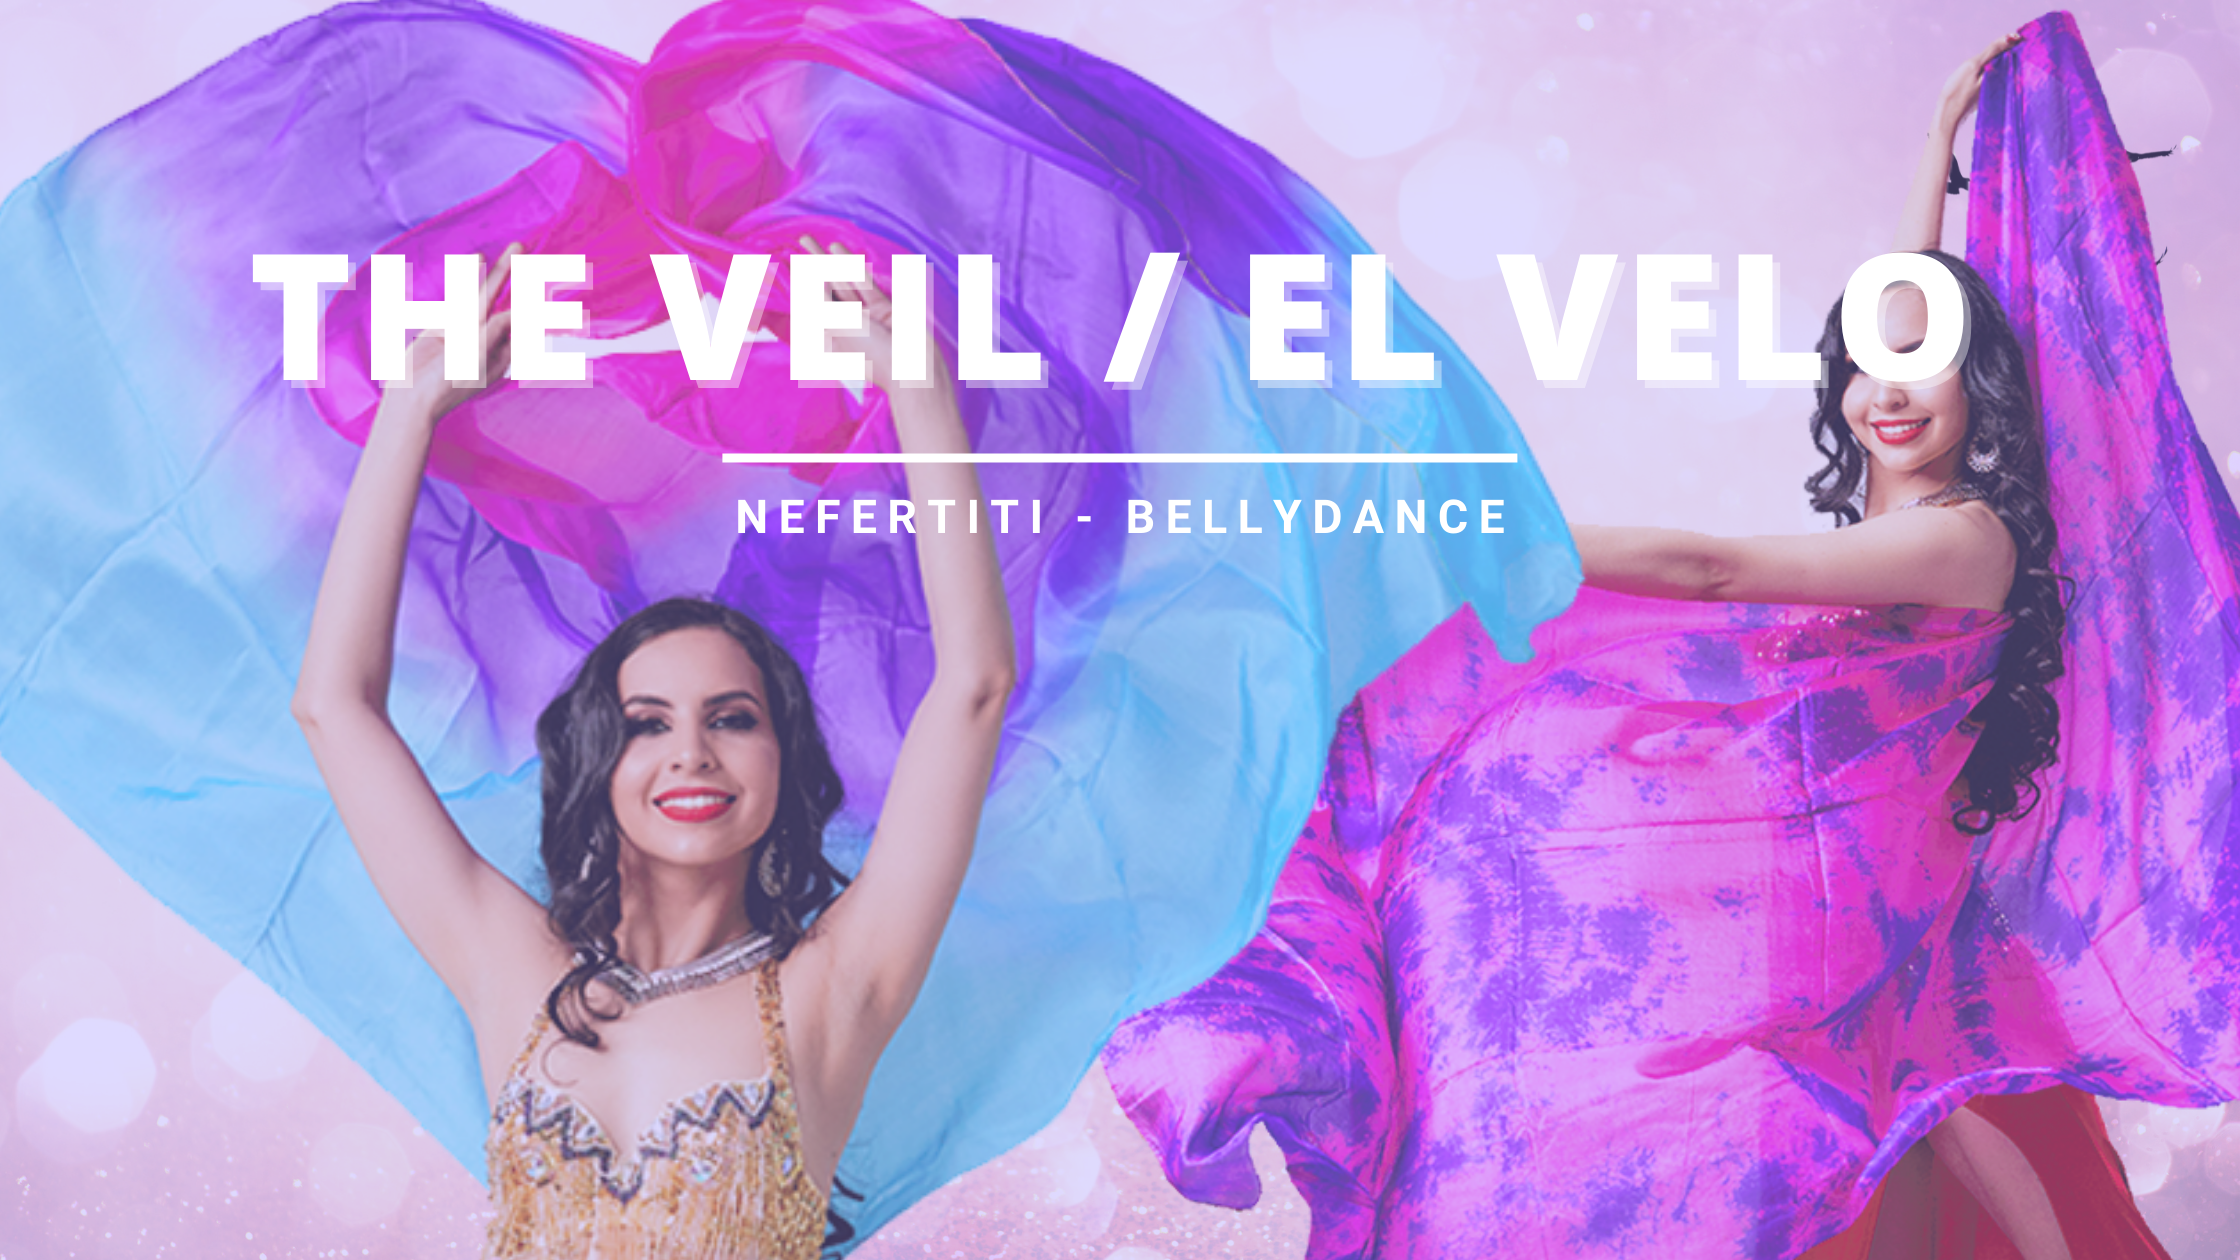 belly dancing silk veil story background